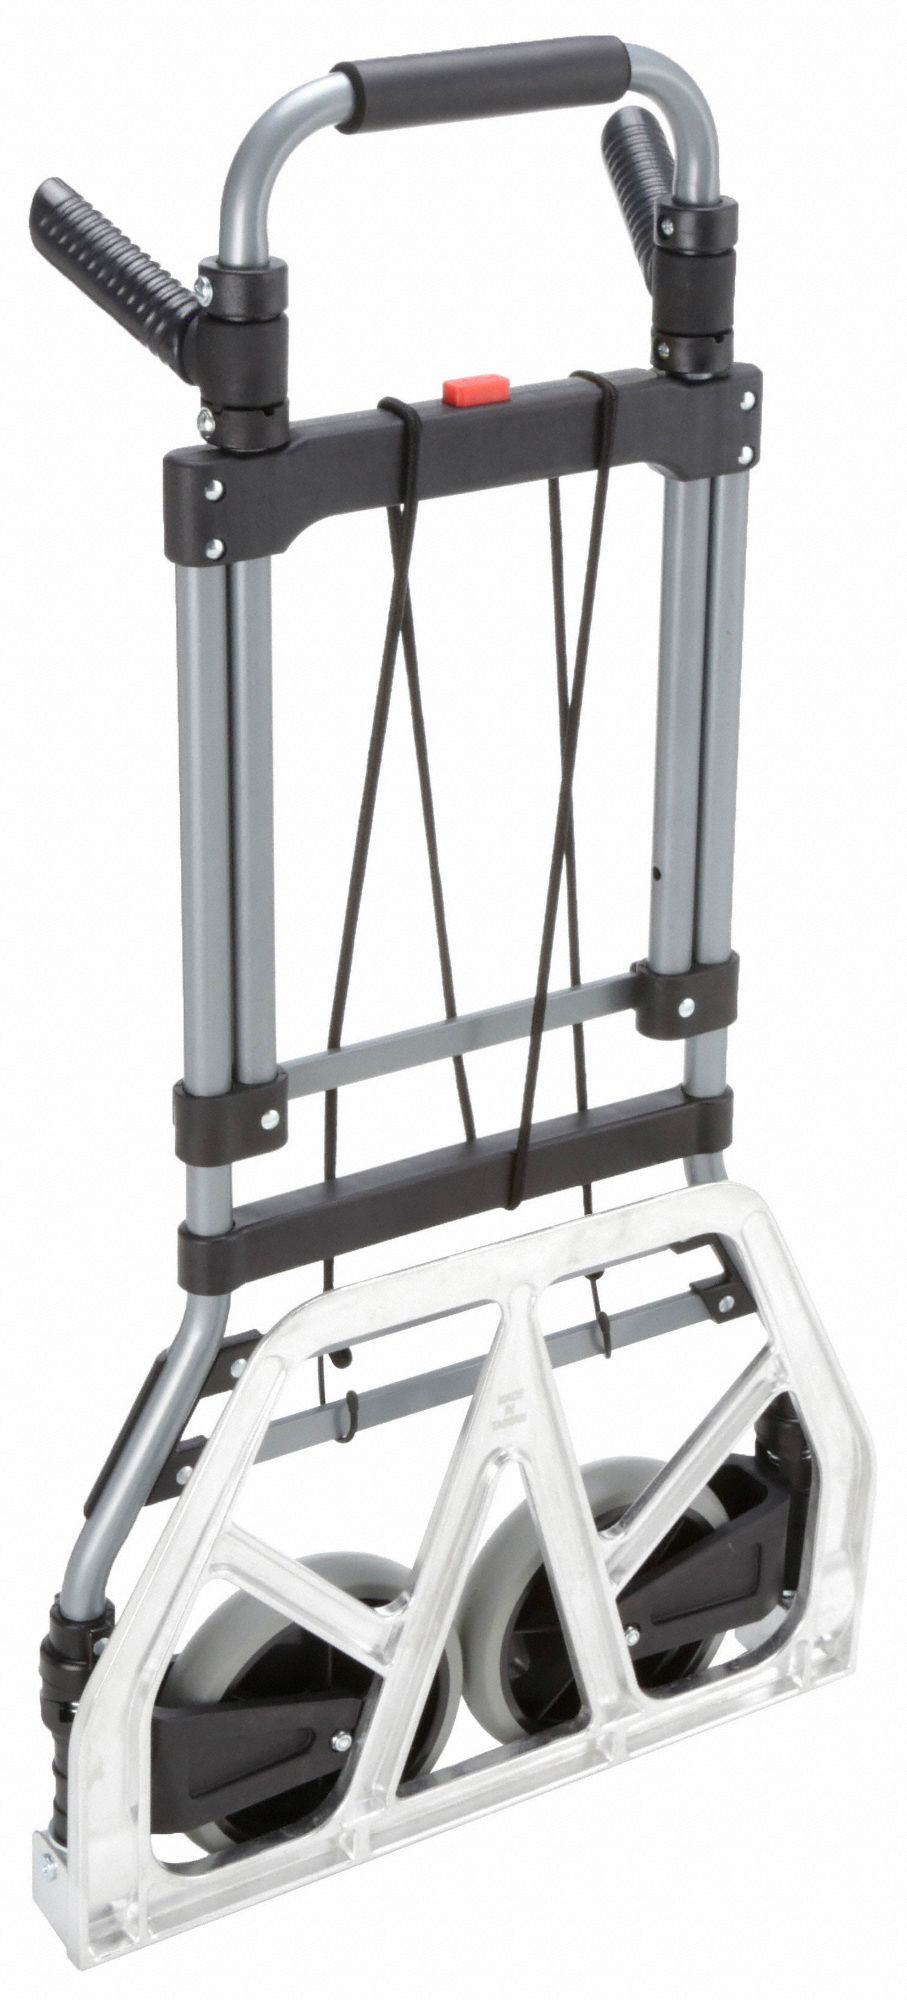 Blue | No. 402912 TecTake 800576 Collapsible Handcart Frame made from sturdy Steel tubing Collapses in one Motion